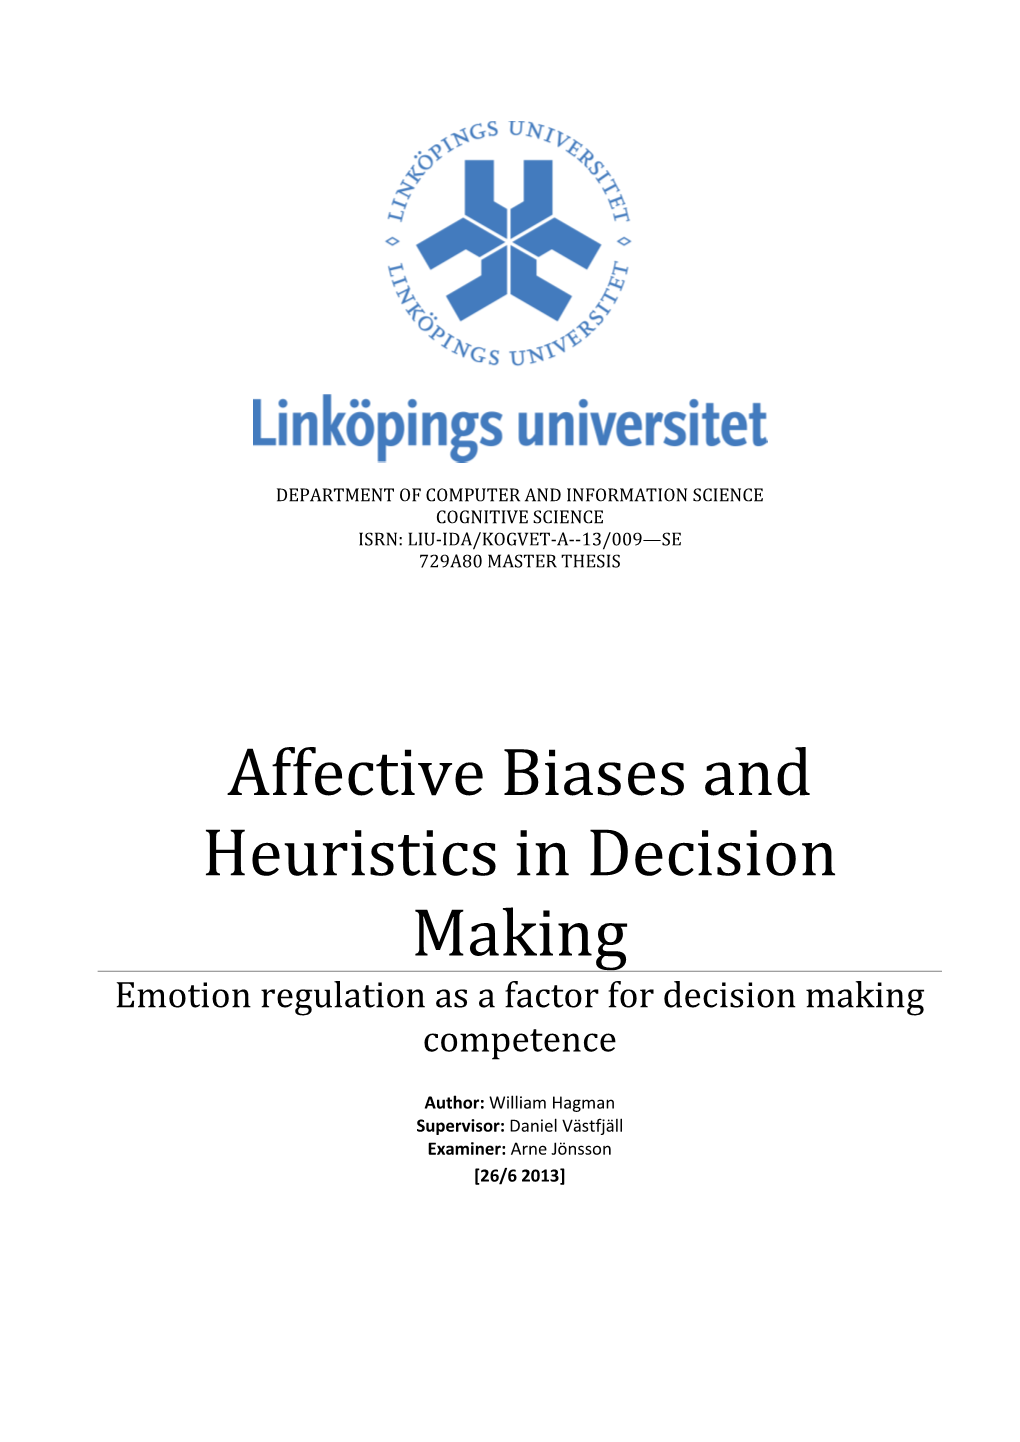 Affective Biases and Heuristics in Decision Making Emotion Regulation As a Factor for Decision Making Competence